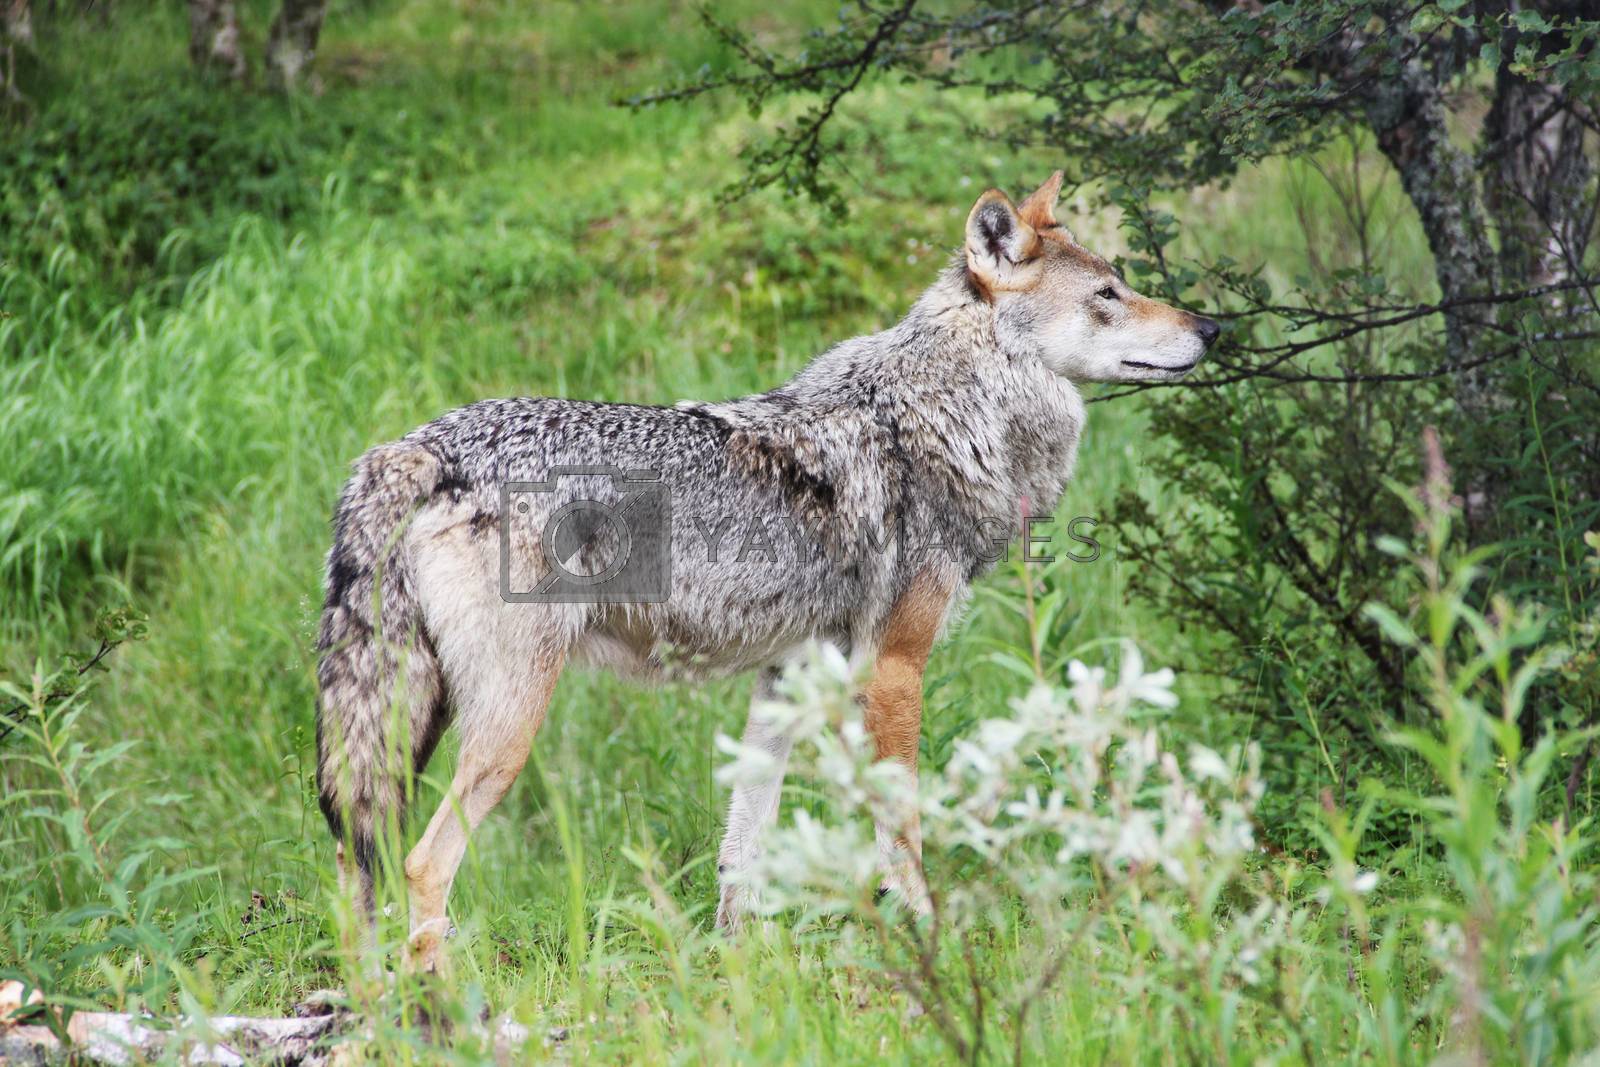 Royalty free image of Gray Wolf in forest by destillat